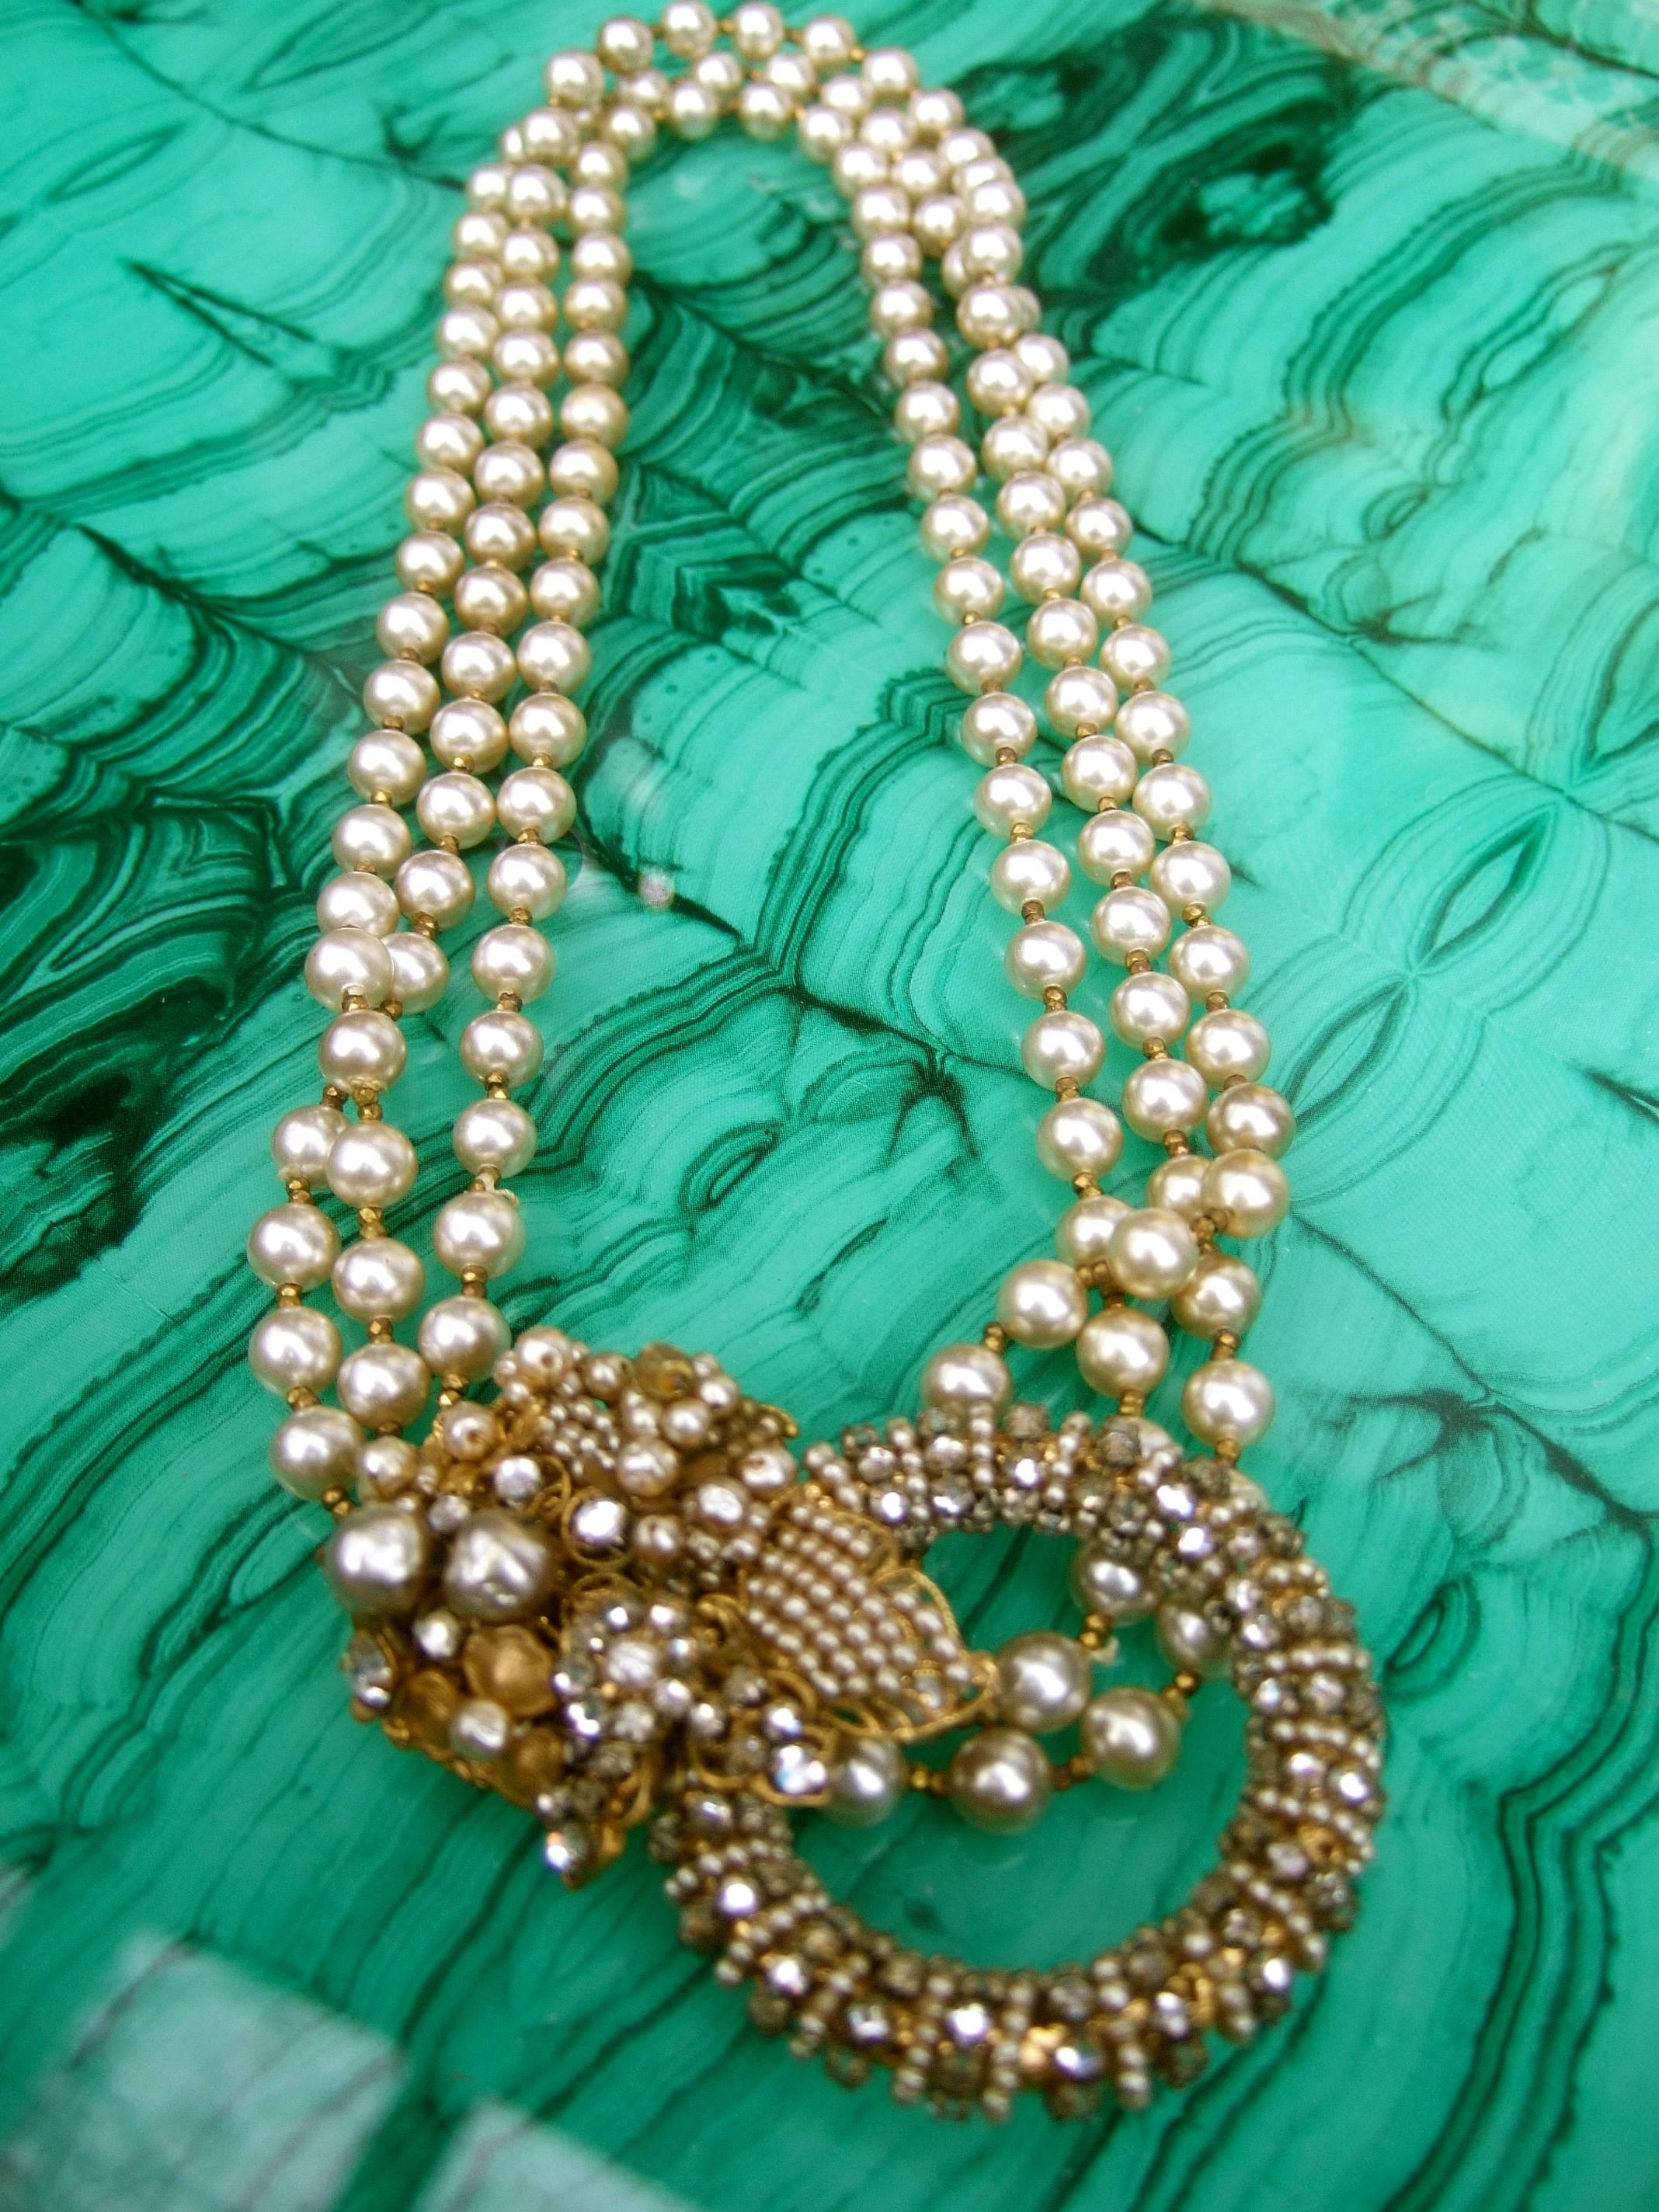 Baroque Miriam Haskell Glass Pearl Choker Necklace circa 1950s